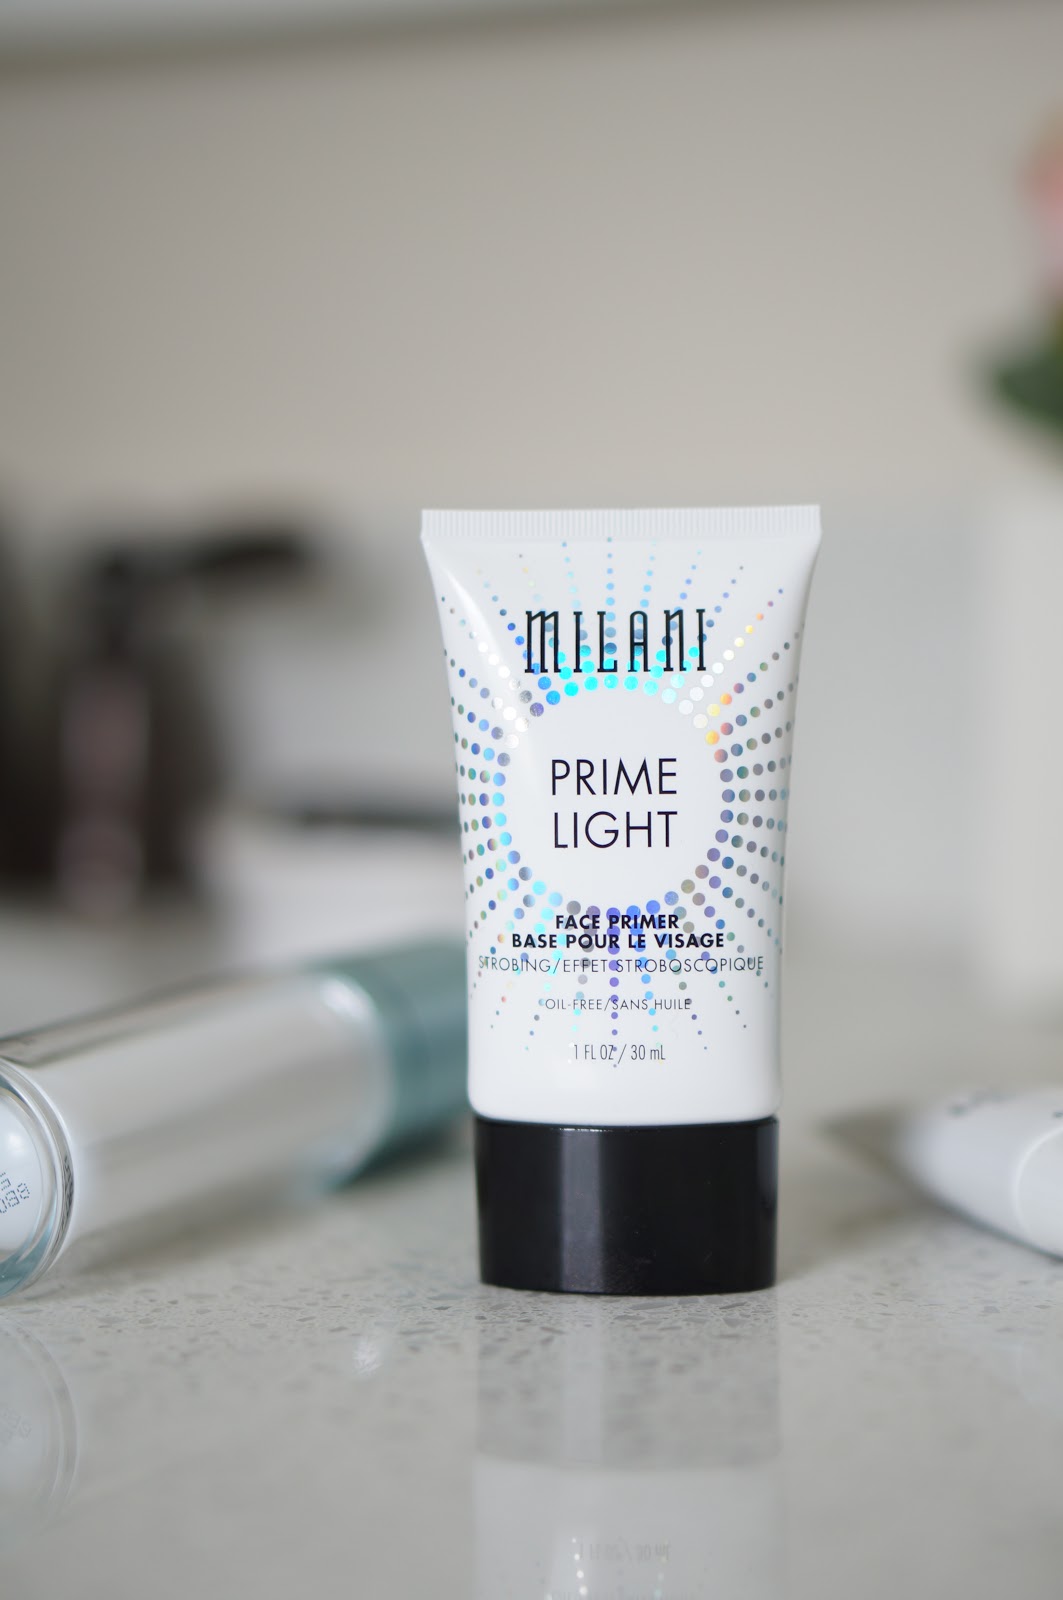 Popular North Carolina style blogger Rebecca Lately shares three dewy face primers from the drugstore. Click here to read about them and which one is the best.